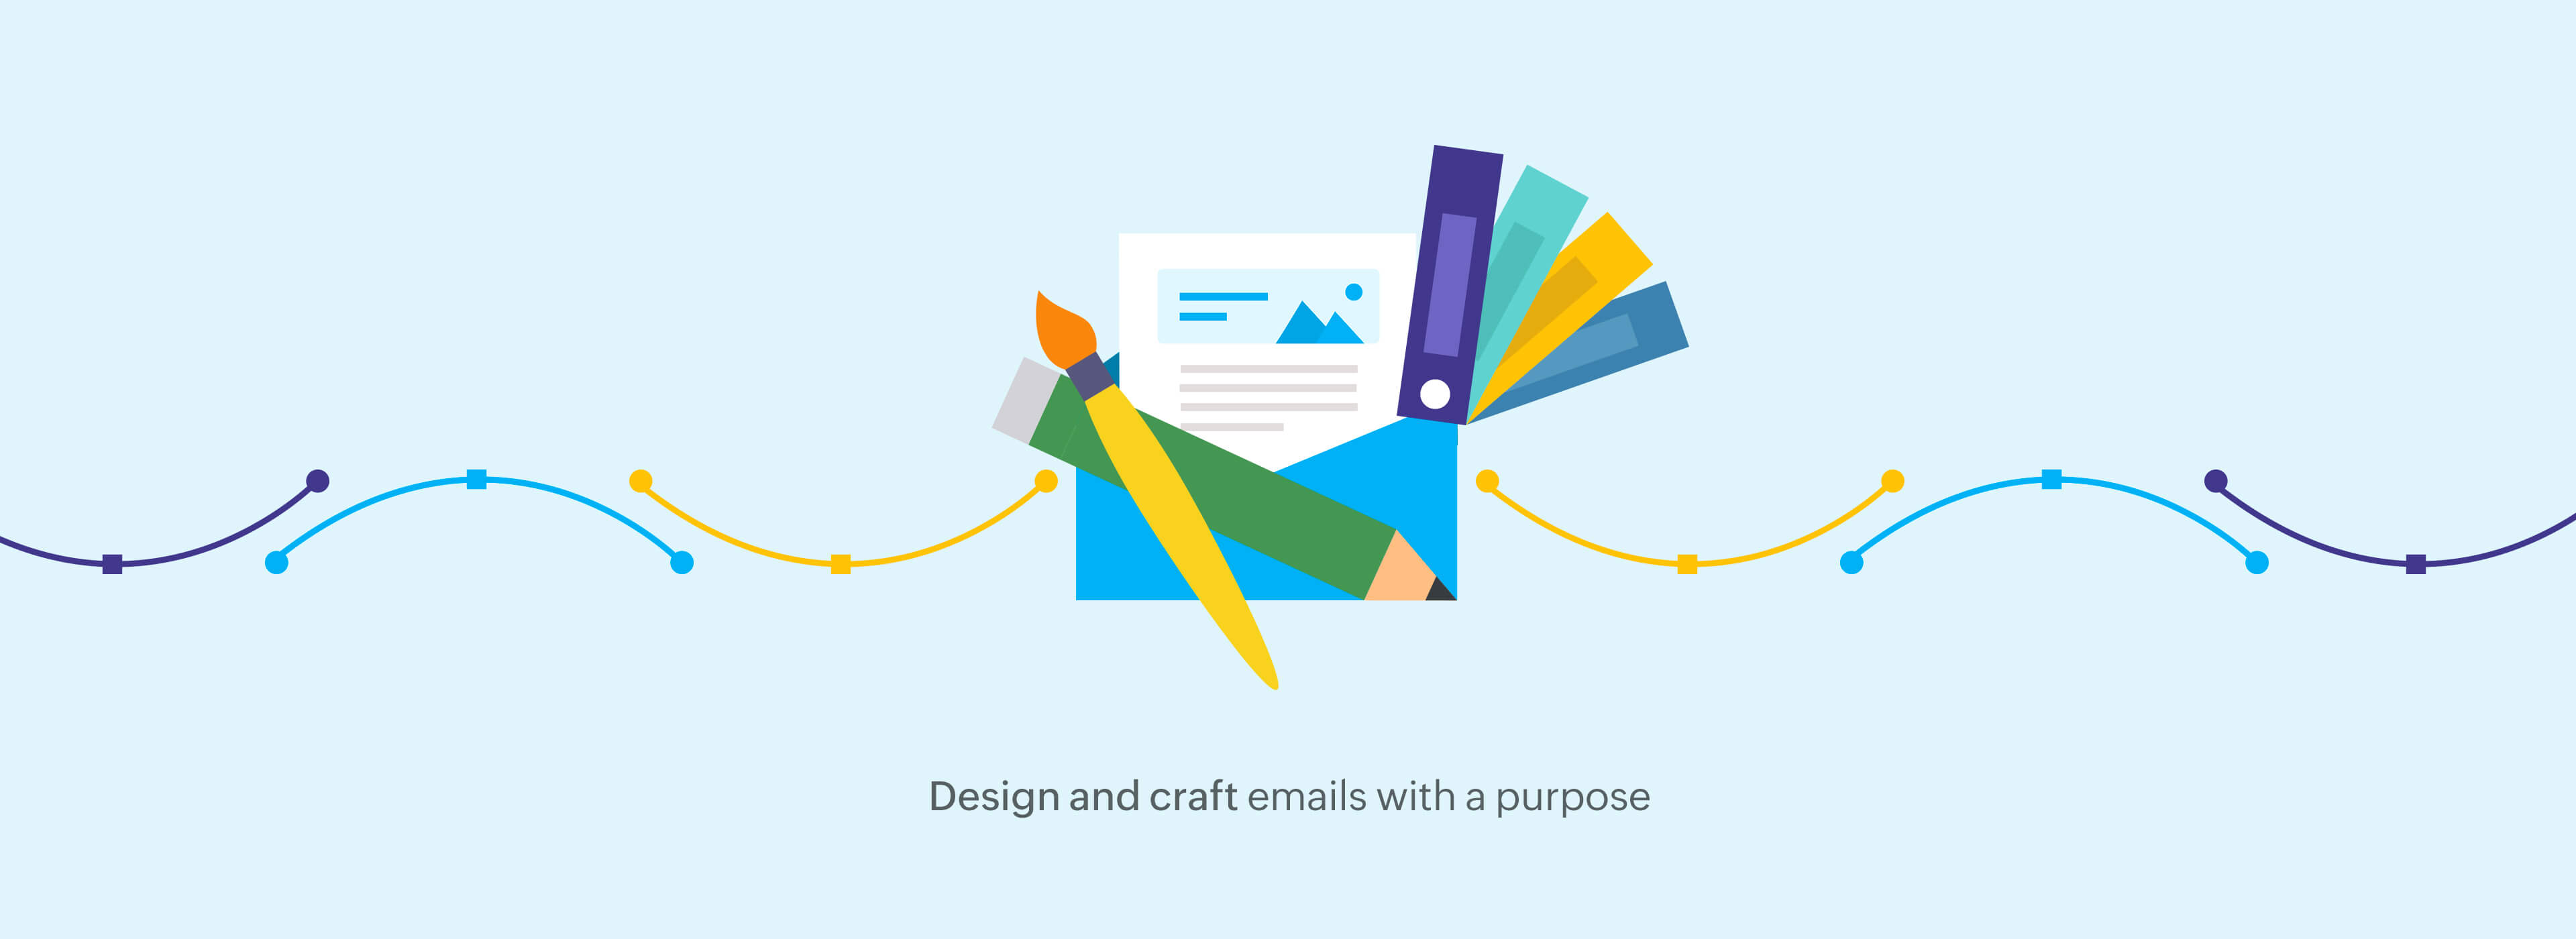 Design and craft emails with a purpose